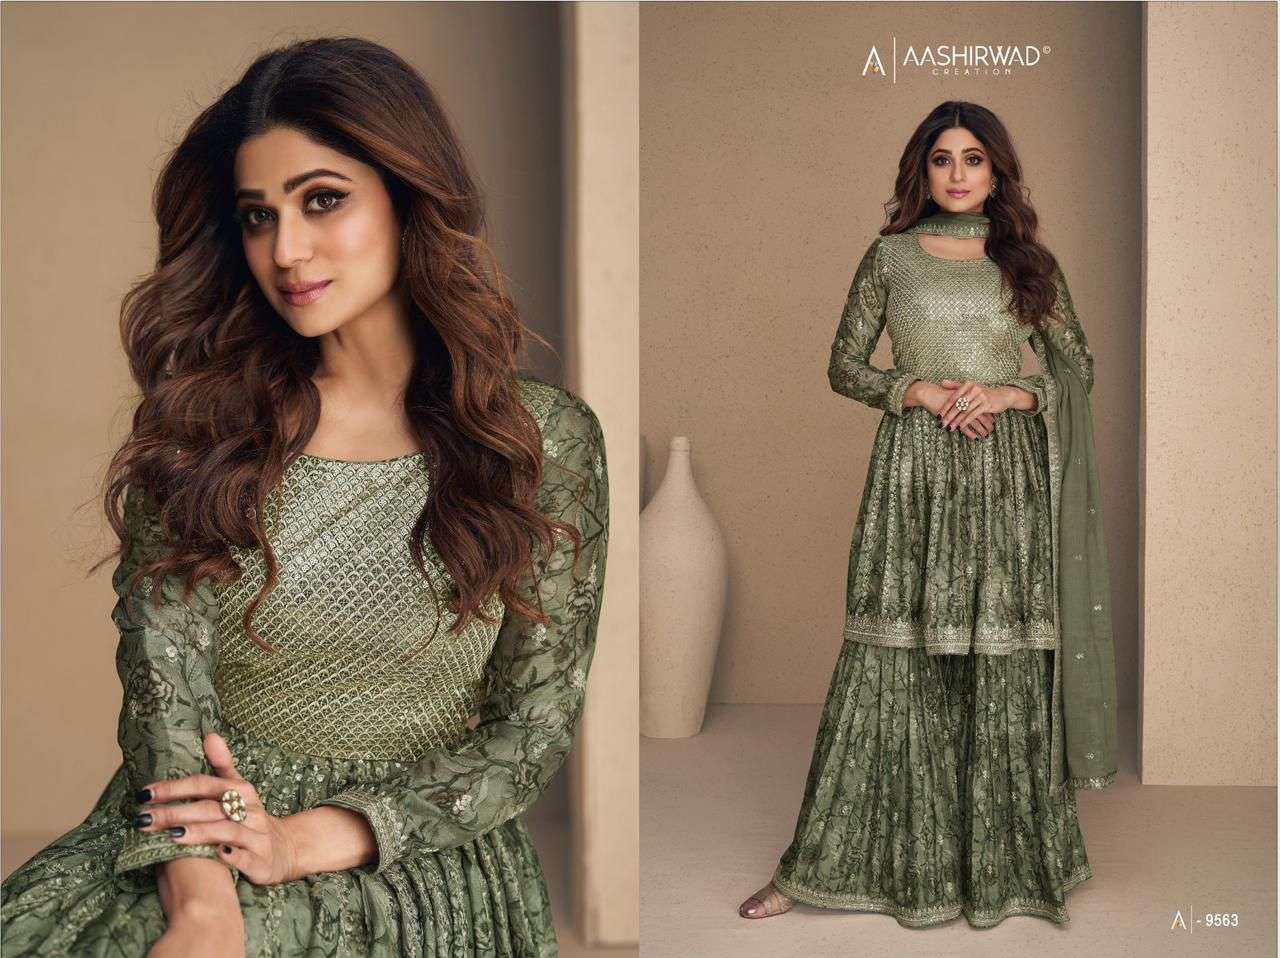 Flower By Aashirwad Creation 9560 To 9564 Series Beautiful Sharara Suits Colorful Stylish Fancy Casual Wear & Ethnic Wear Chinnon Silk Digital Print Dresses At Wholesale Price